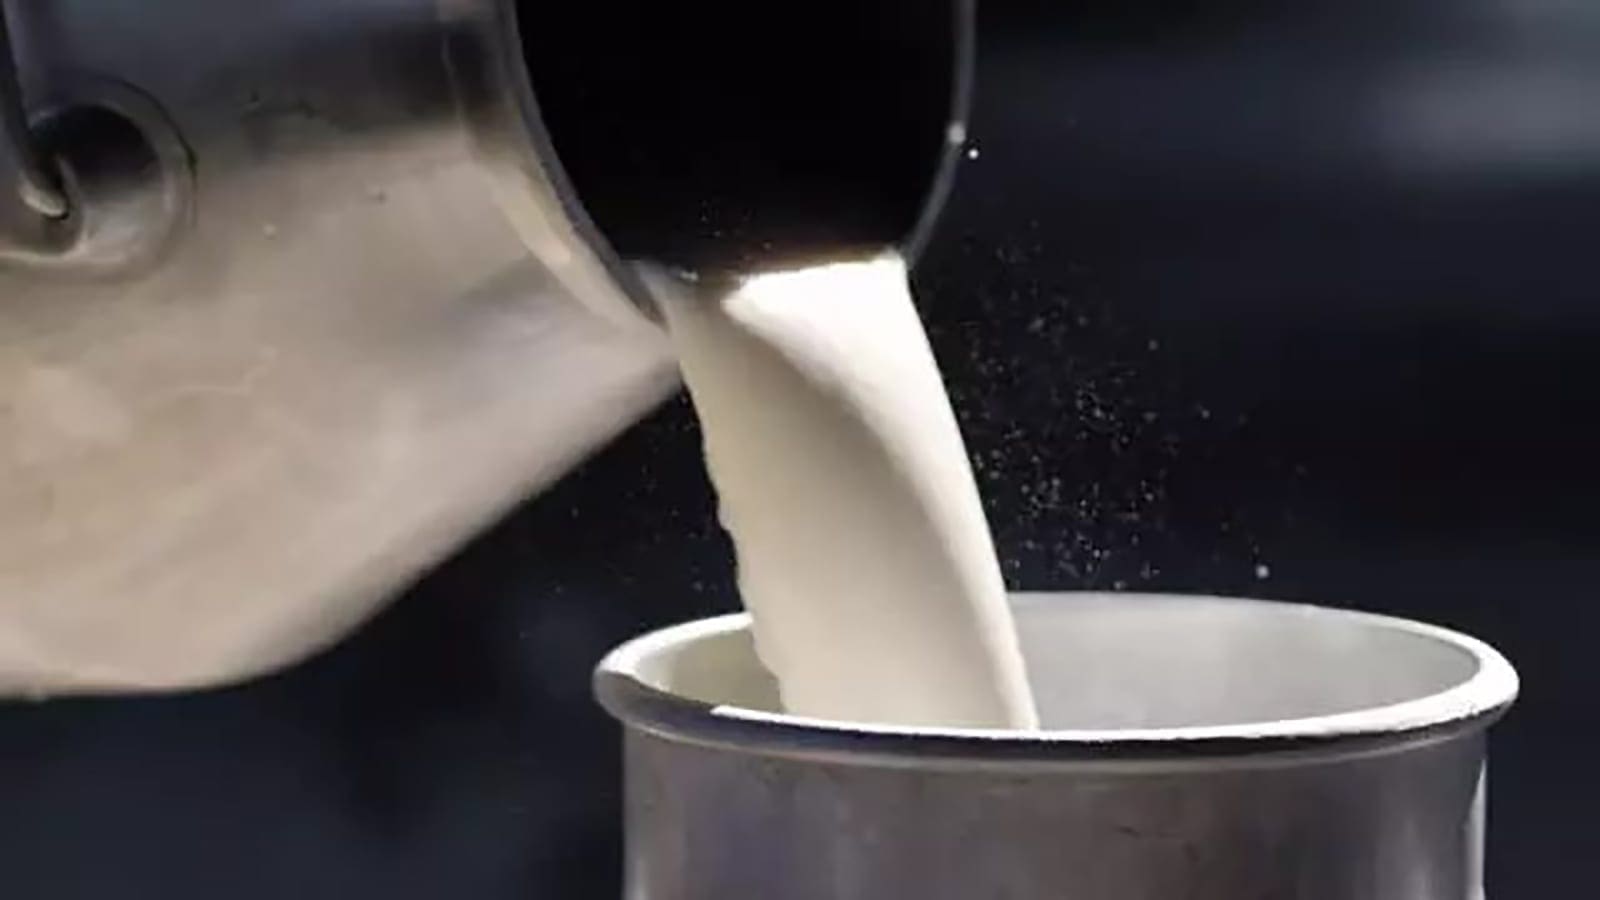 Indian dairy industry to expand by 11% in 2022 driven by increasing per capita consumption